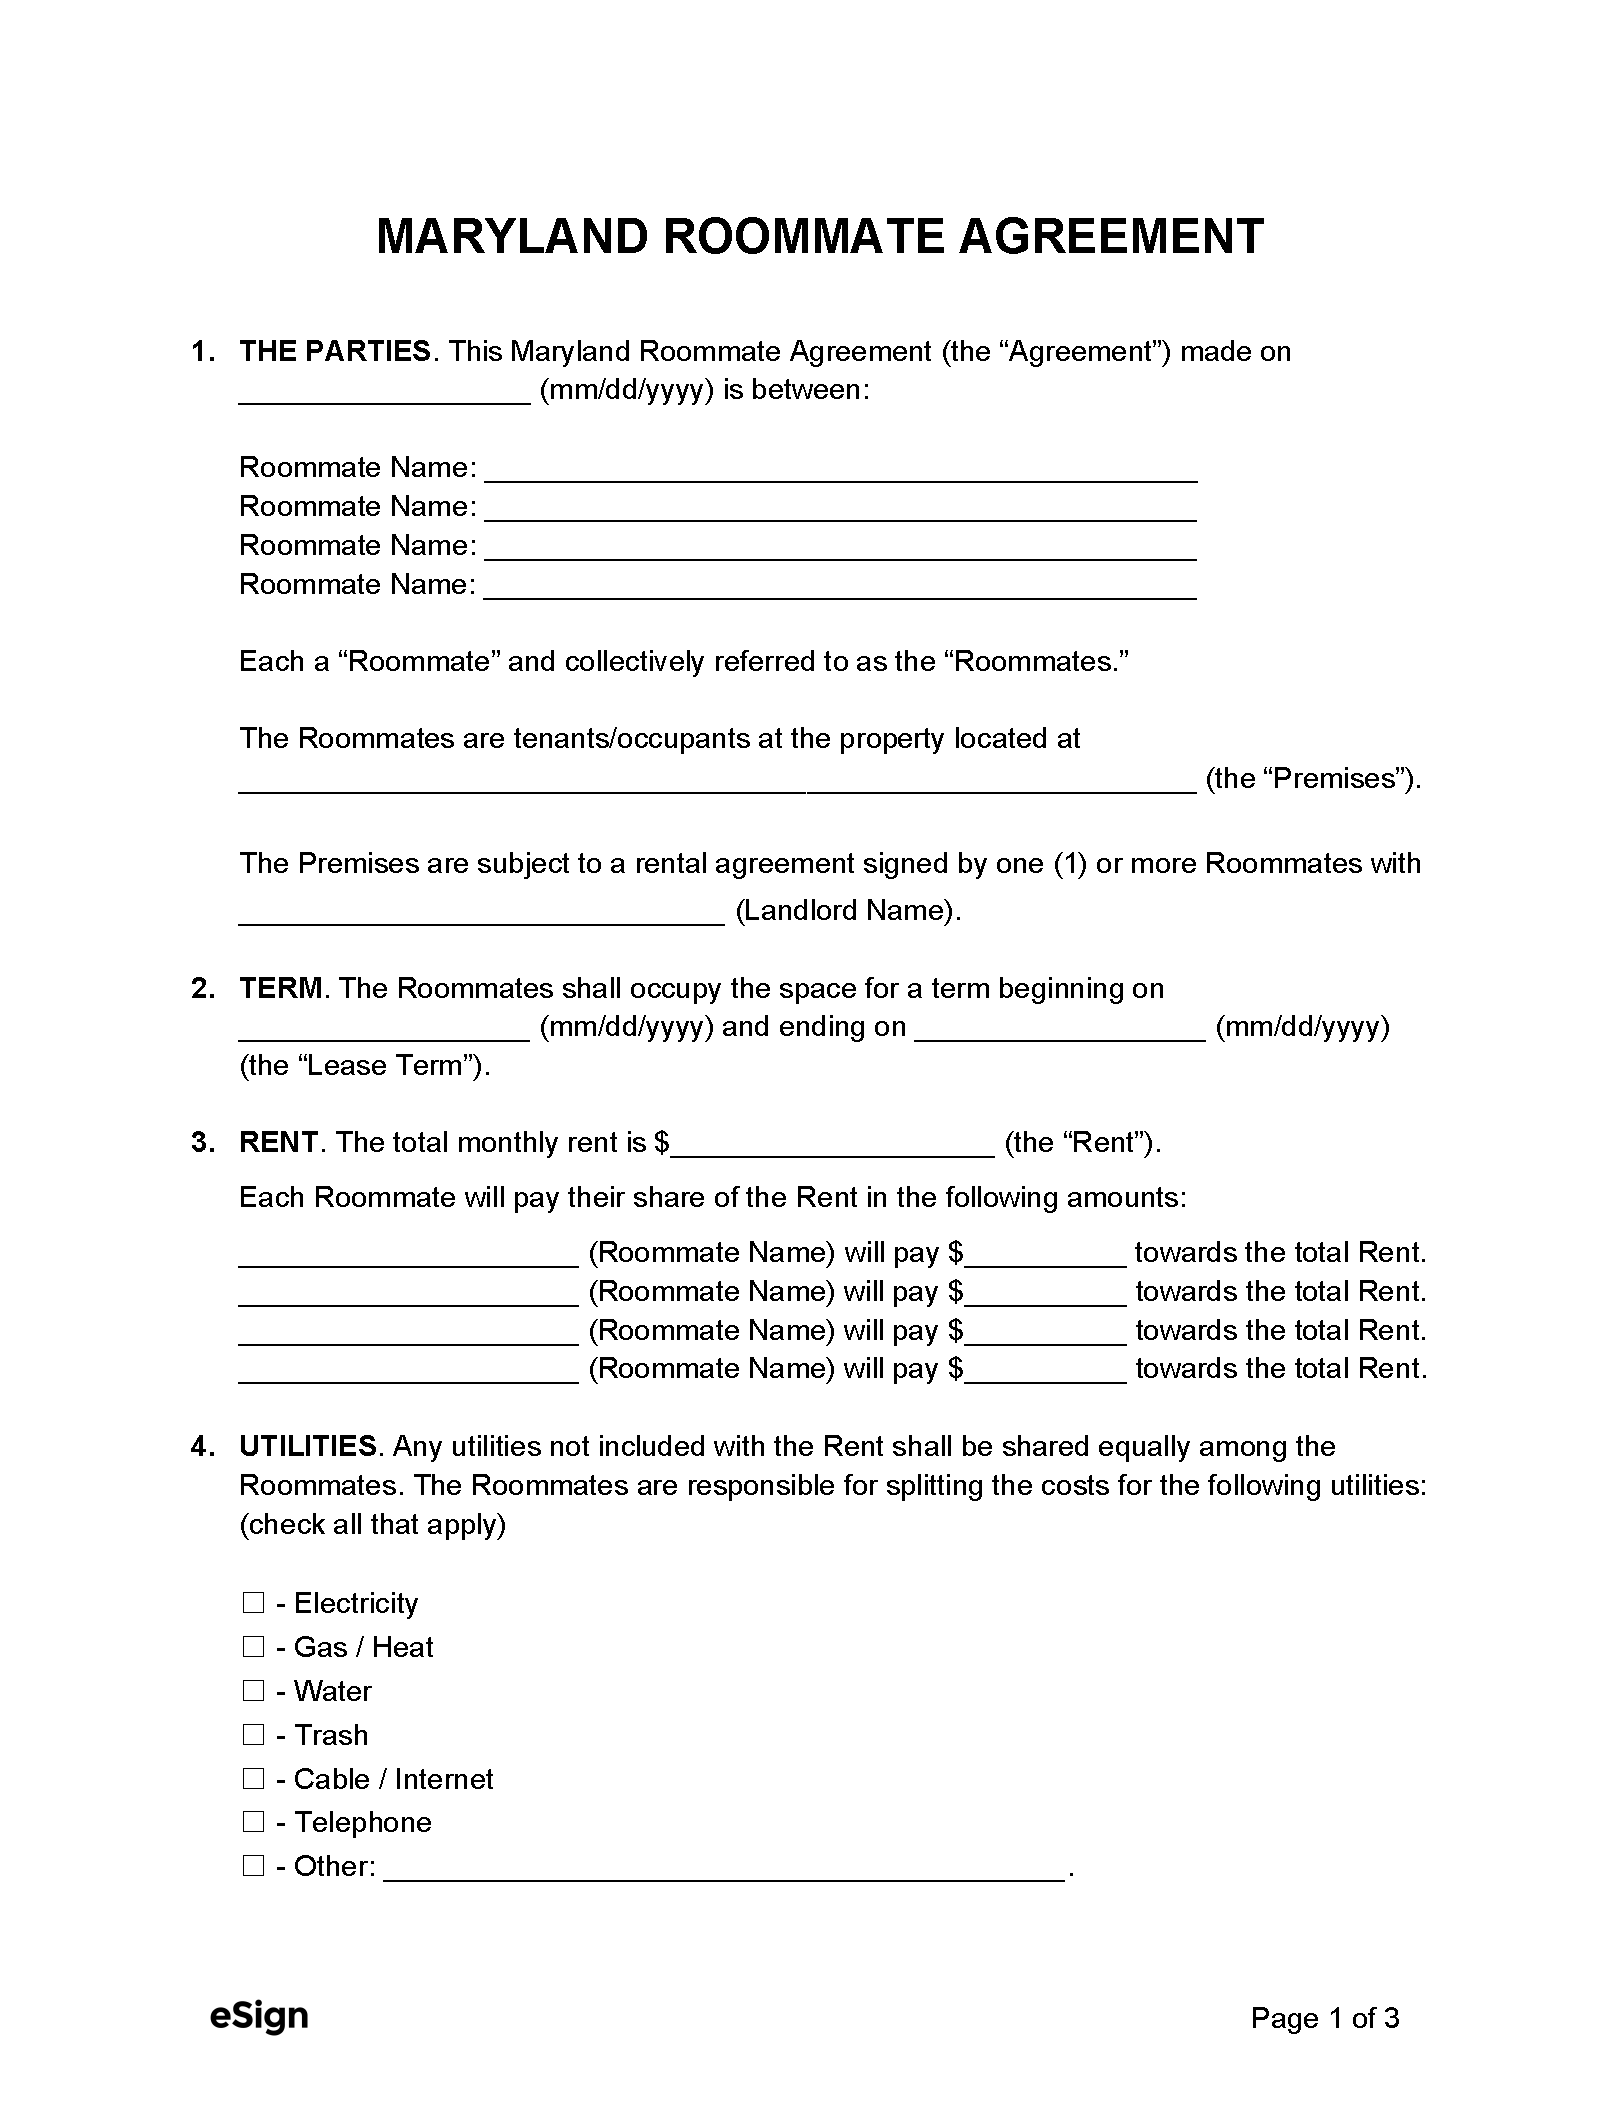 Free Maryland Rental Lease Agreement Templates (6) PDF Word